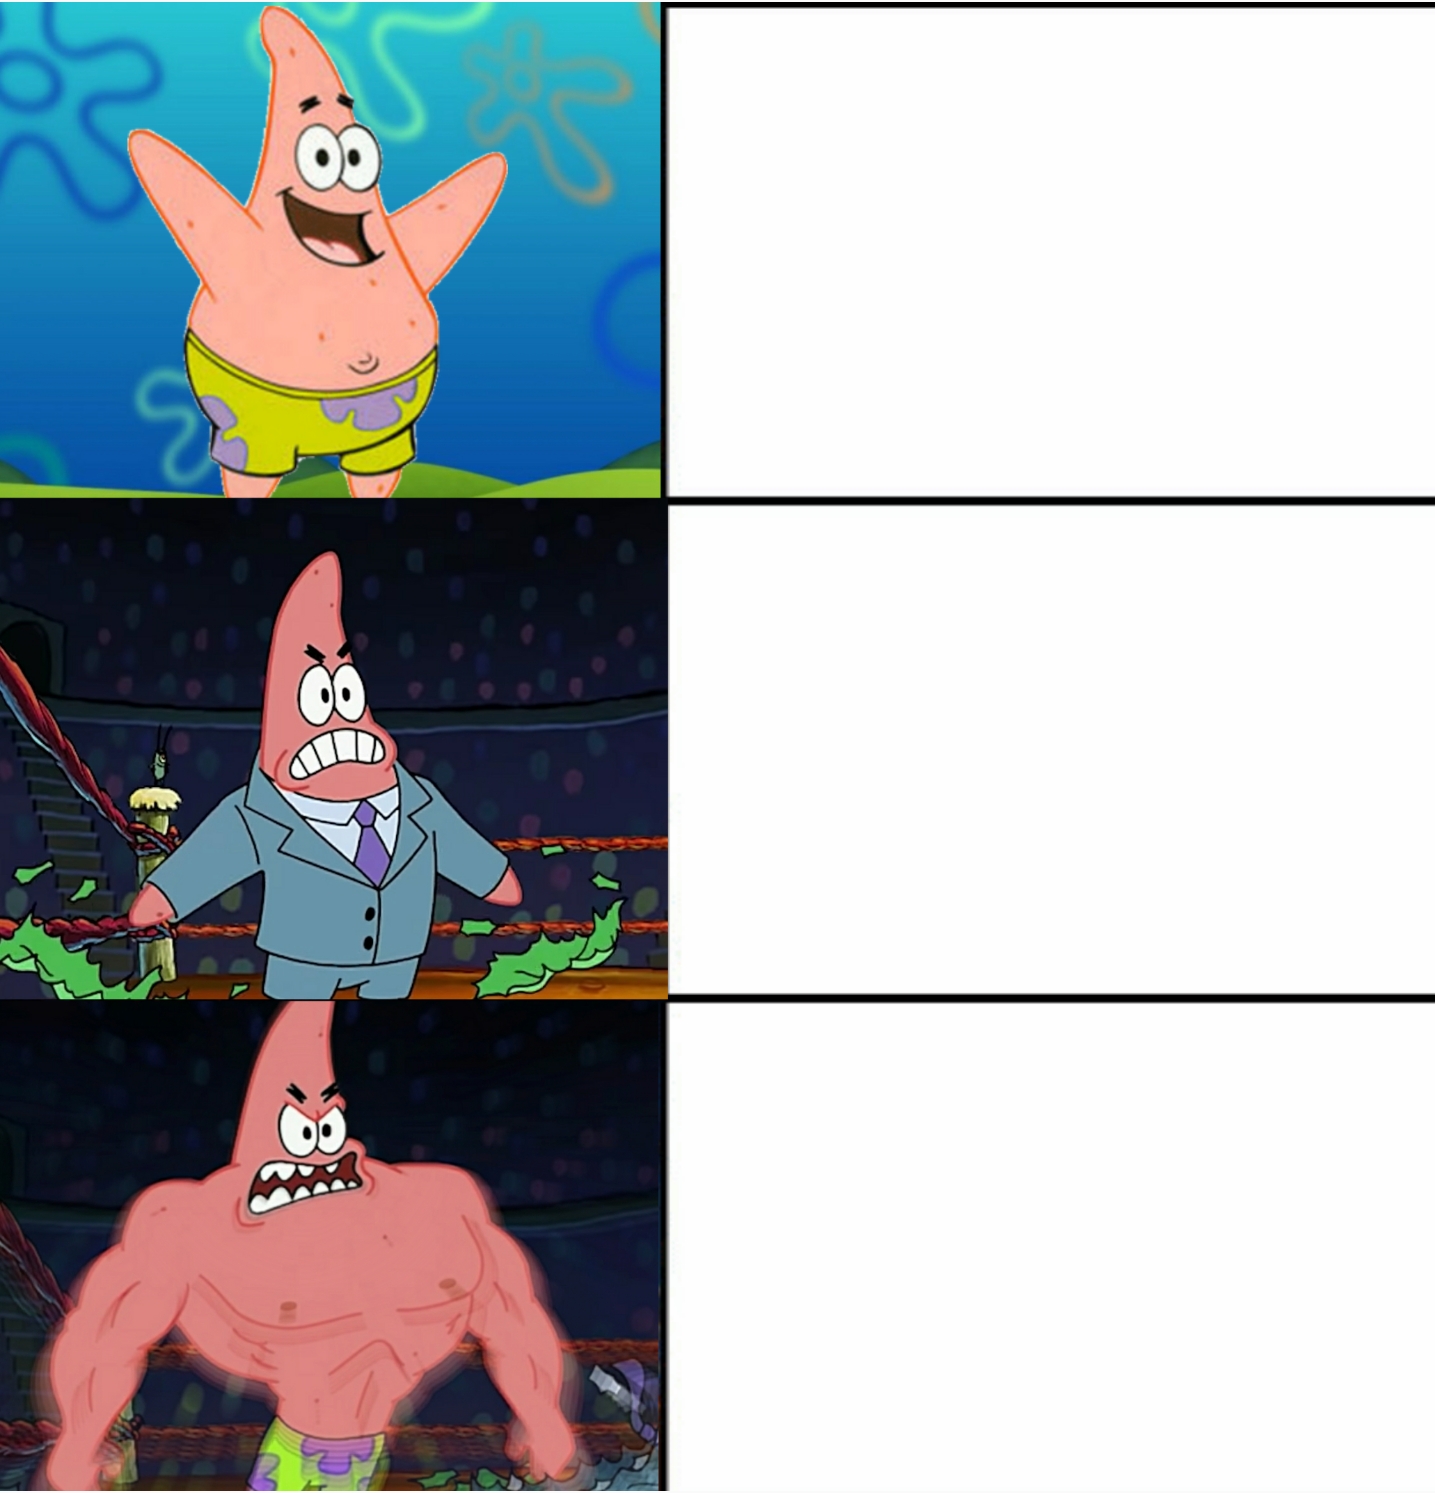 No "Patrick Star" memes have been featured yet. 